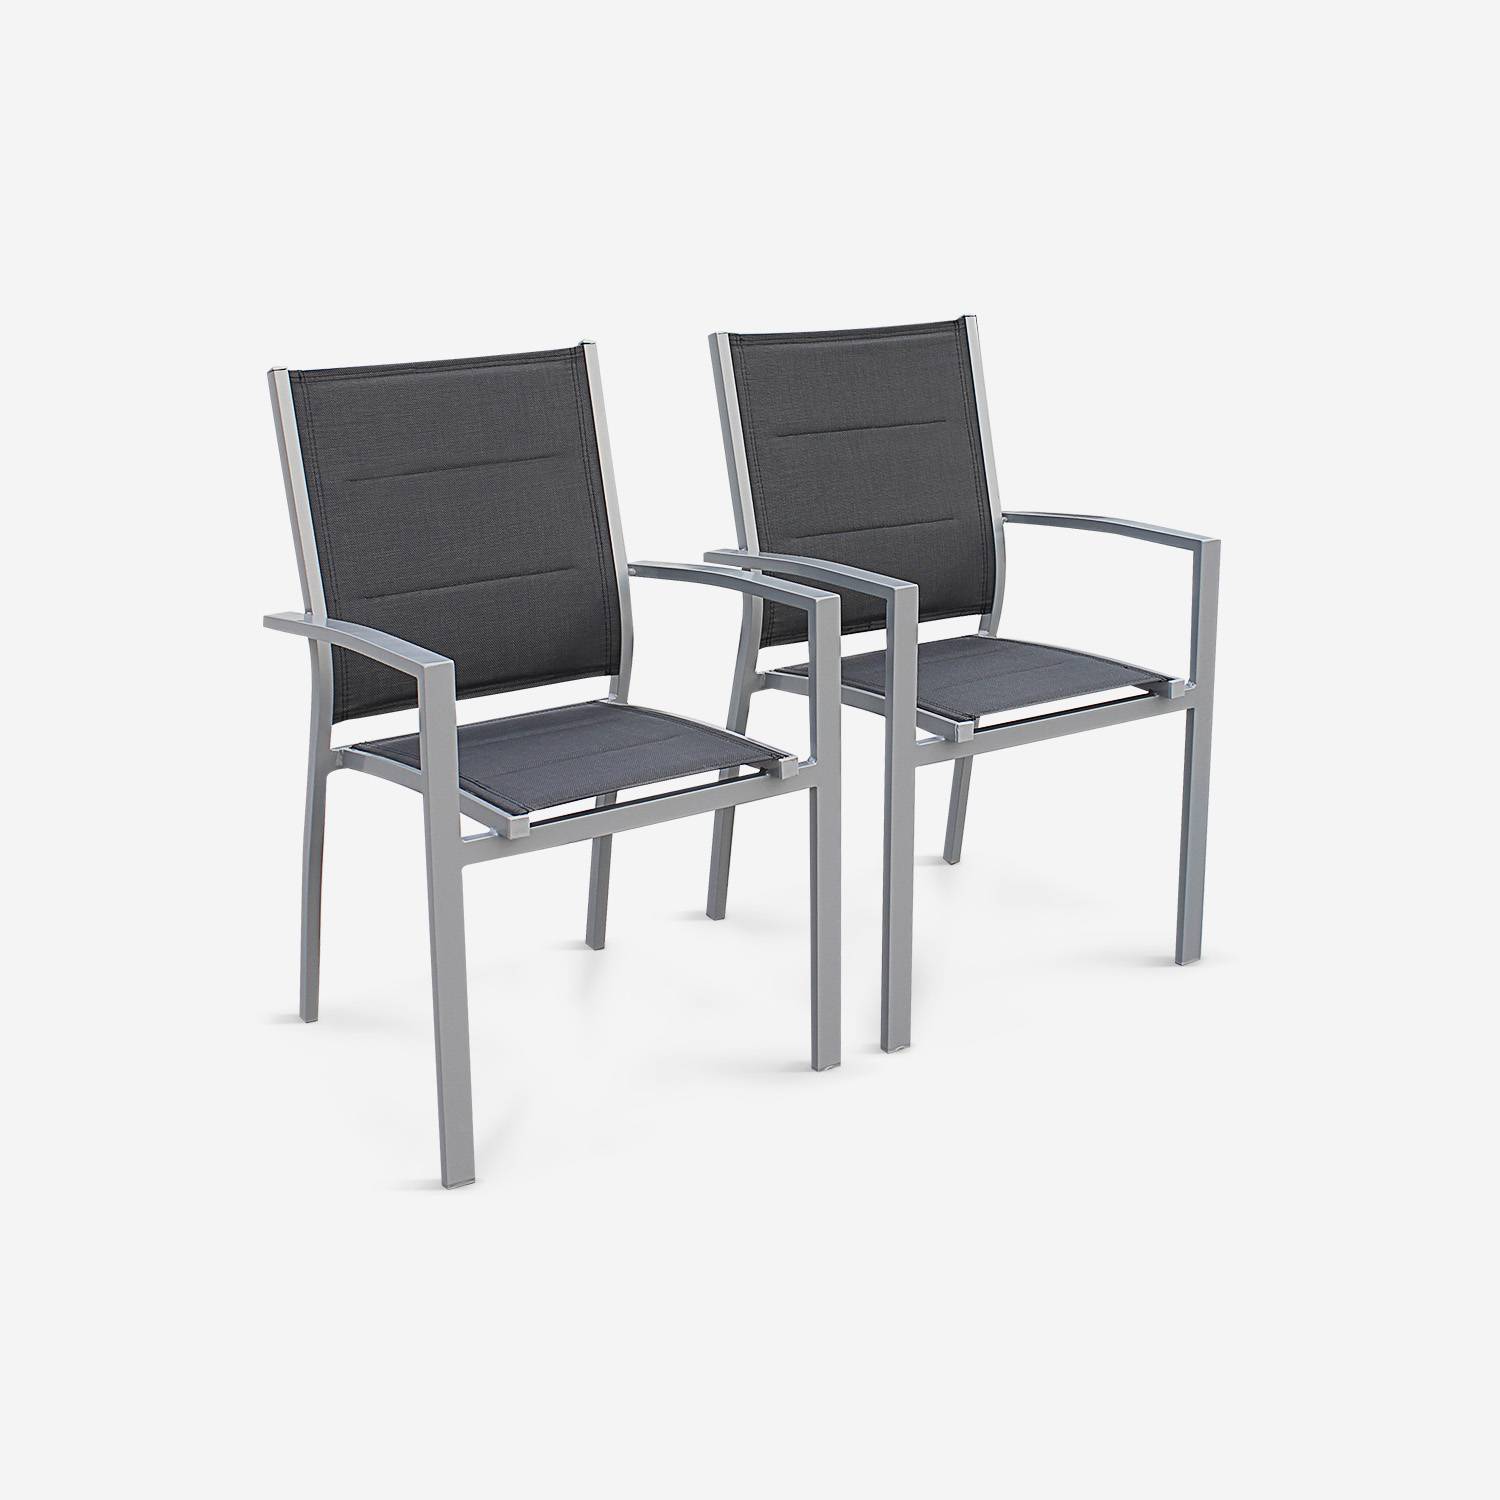 Set of 2 stackable armchairs - Chicago - Grey aluminium and Charcoal Grey textilene Photo3